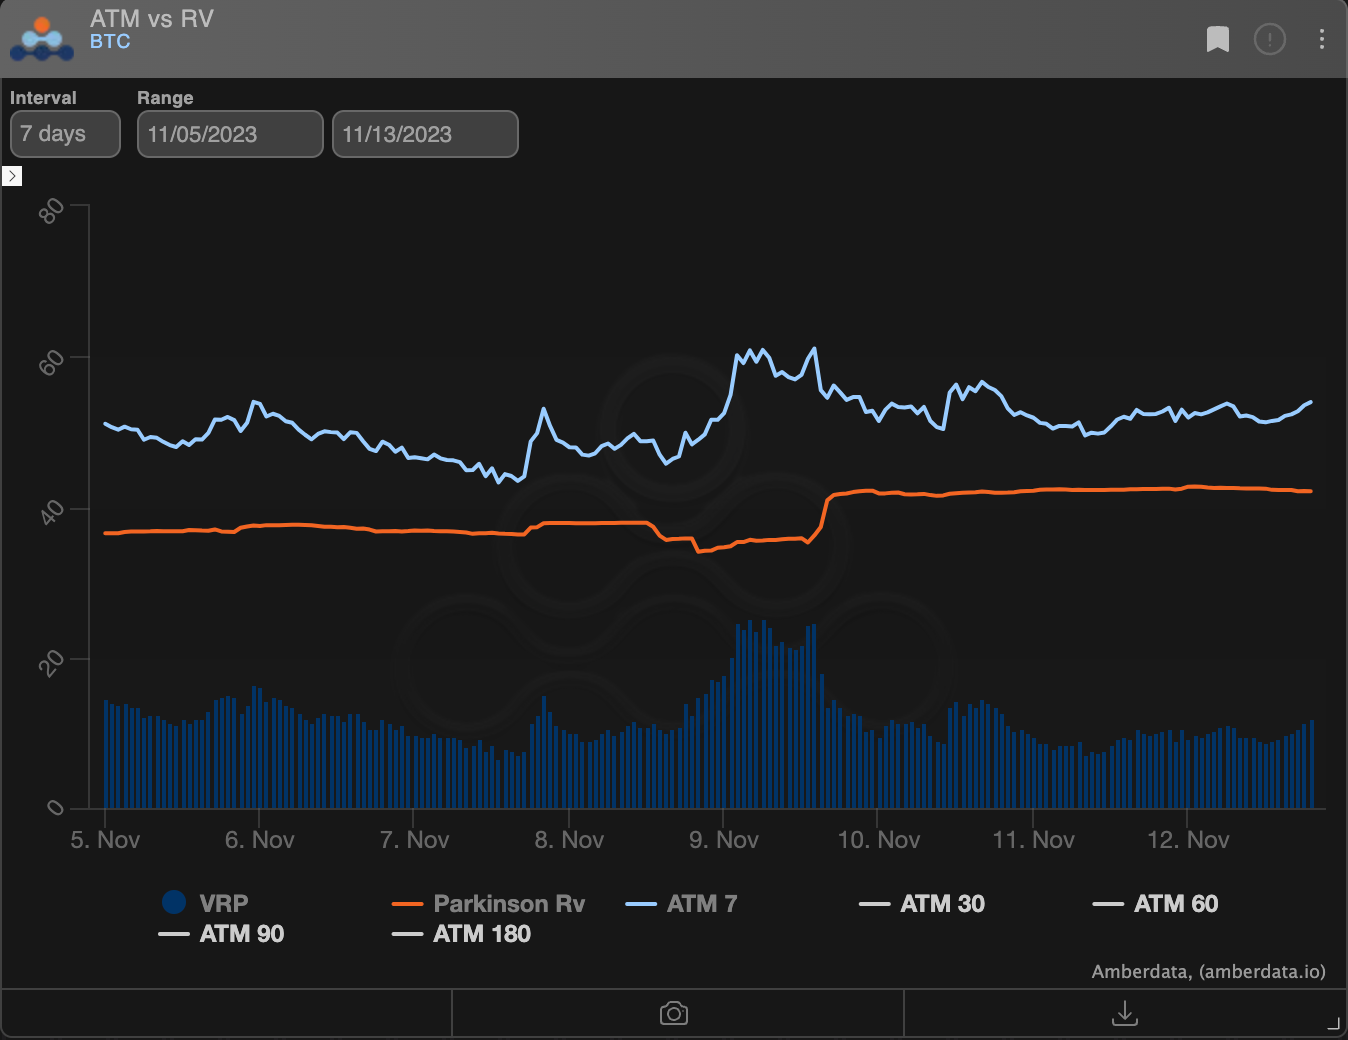 Amberdata Derivatives BTC 7-day VRP currently about +17pts. ATM vs RV